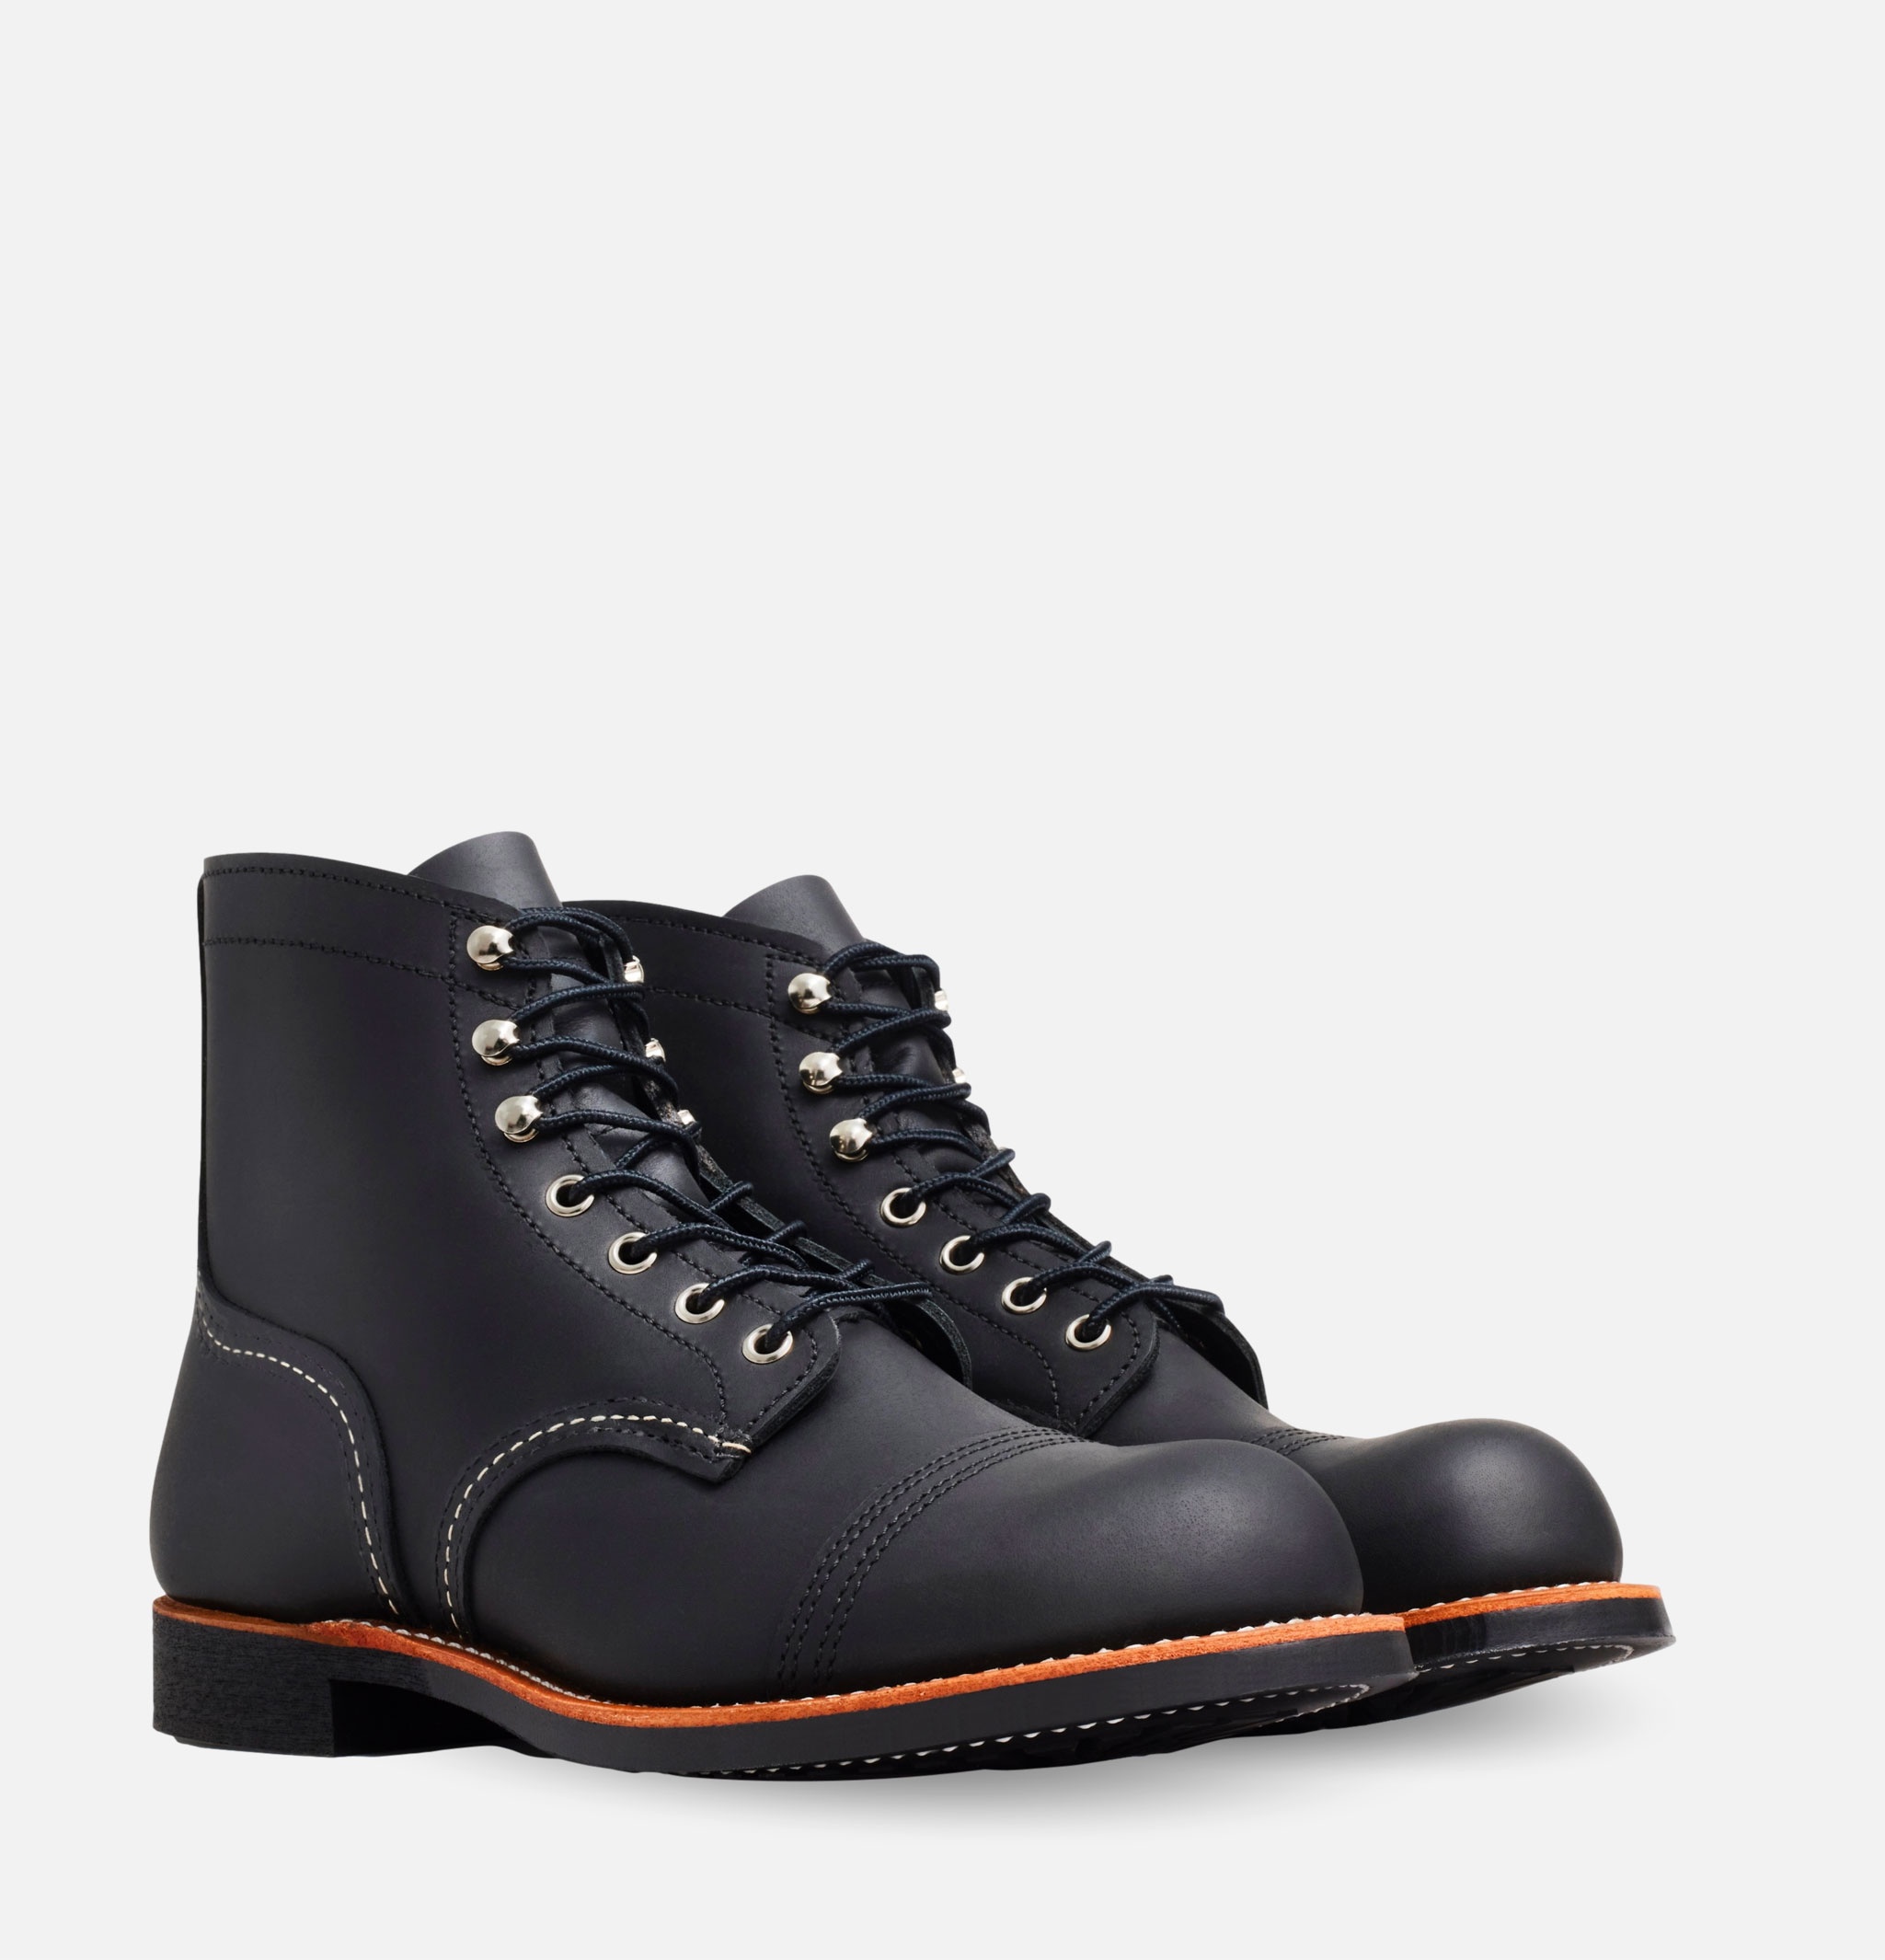 Red Wing Shoes - 8084 - Iron Ranger Black Harness